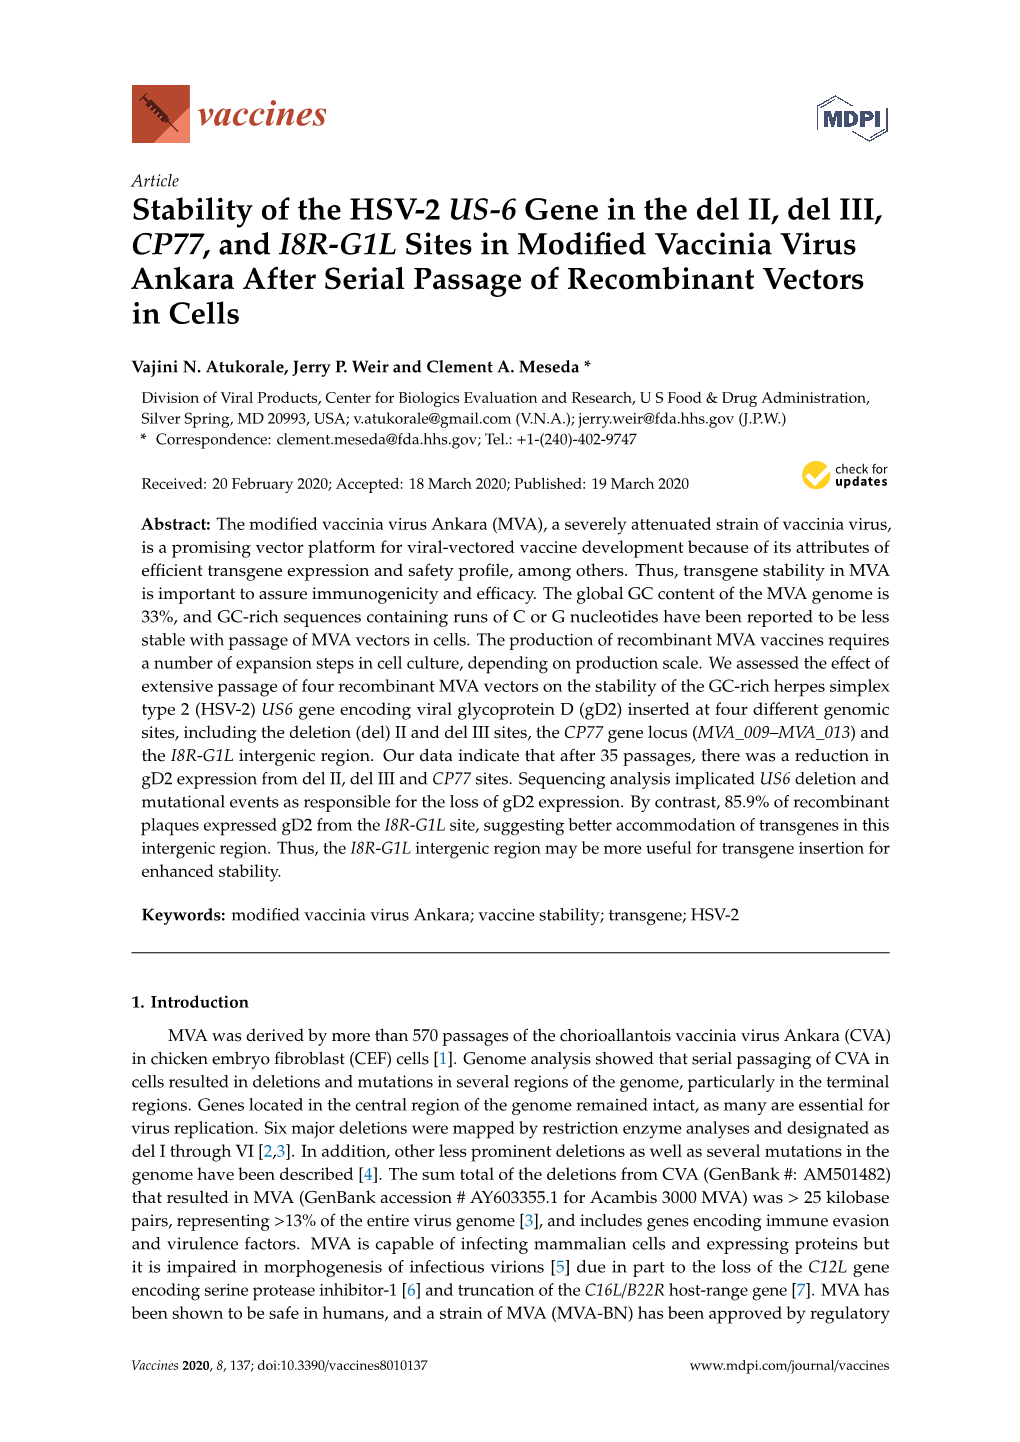 Stability of the HSV-2 US-6 Gene in the Del II, Del III, CP77, and I8R-G1L Sites in Modified Vaccinia Virus Ankara After Serial